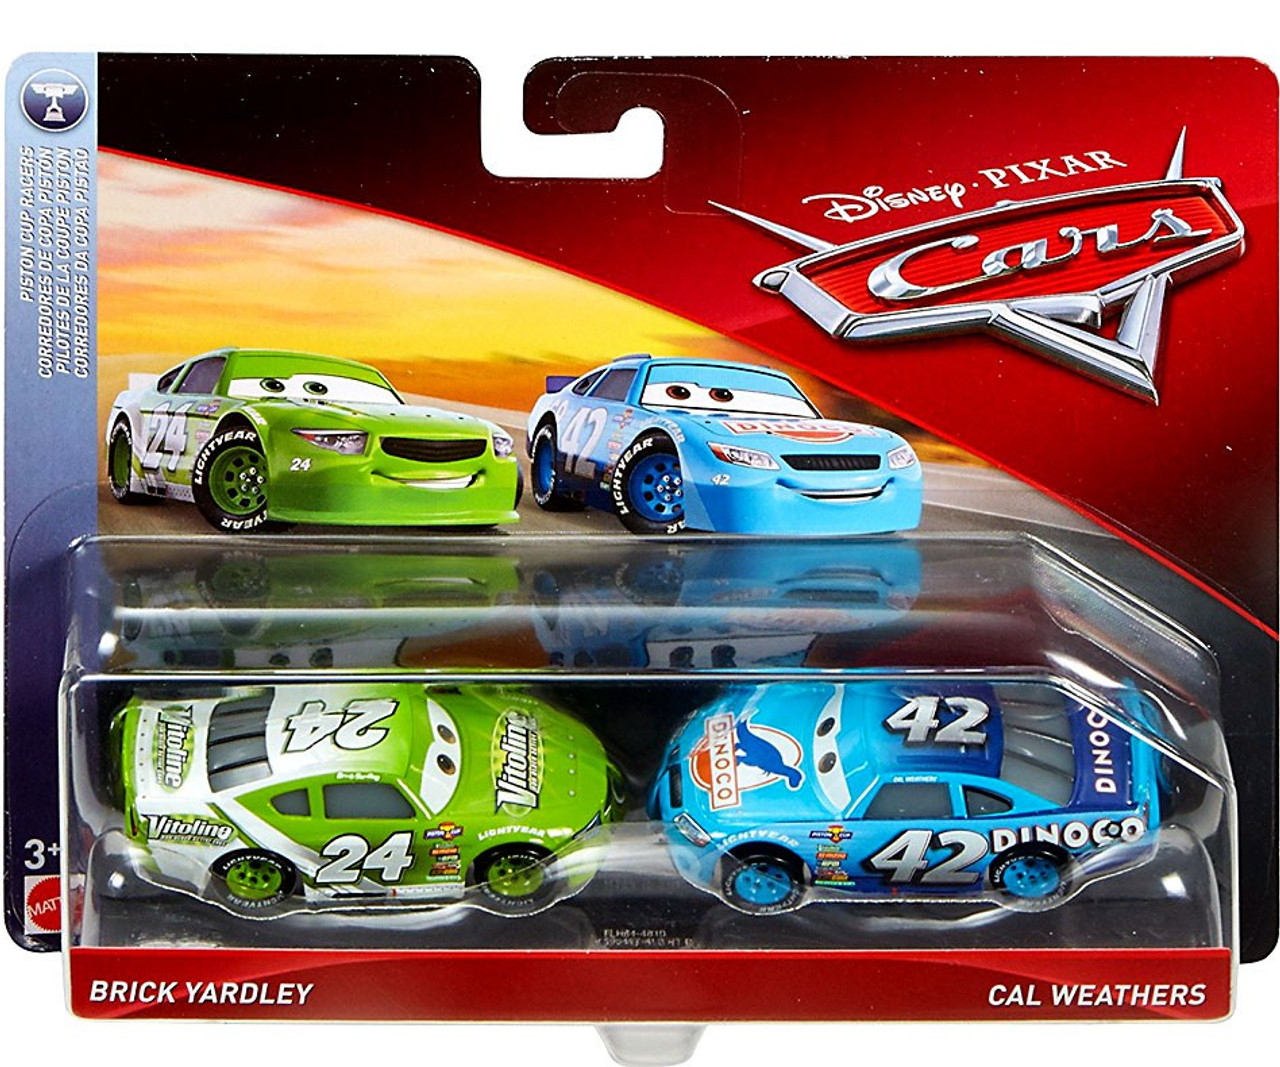 cal weathers diecast